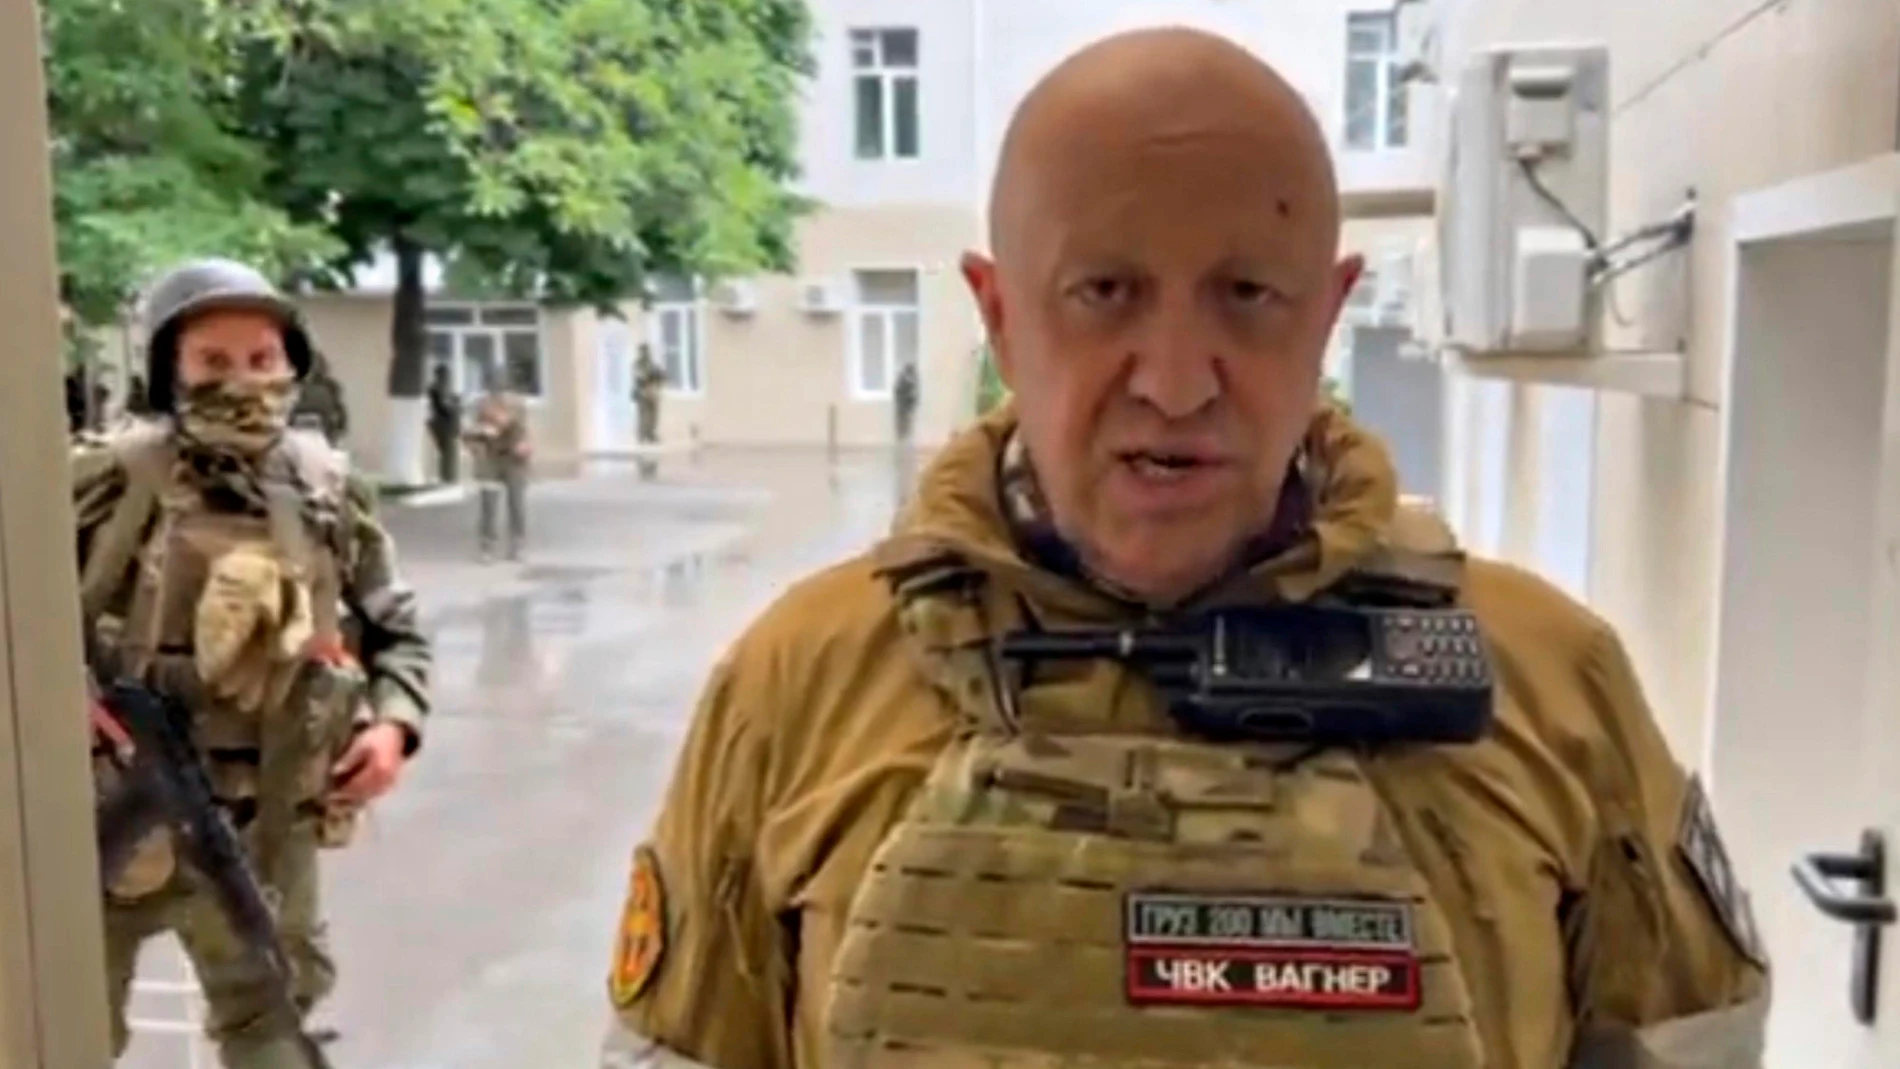 June 24, 2023, Rostov-on-Don, Donetsk Oblast, Ukraine: A screen grab of Russian Yevgeny Prigozhin, owner of the Wagner Group of mercenaries broadcasting from inside the Russian Military Southern District headquarters surrounded by his loyal fighters, June 24, 2023 in Rostov-on-Don, Russia. Prigozhin launched a rebellion against Moscow accusing the government of lying to the nation and corruption. 24/06/2023